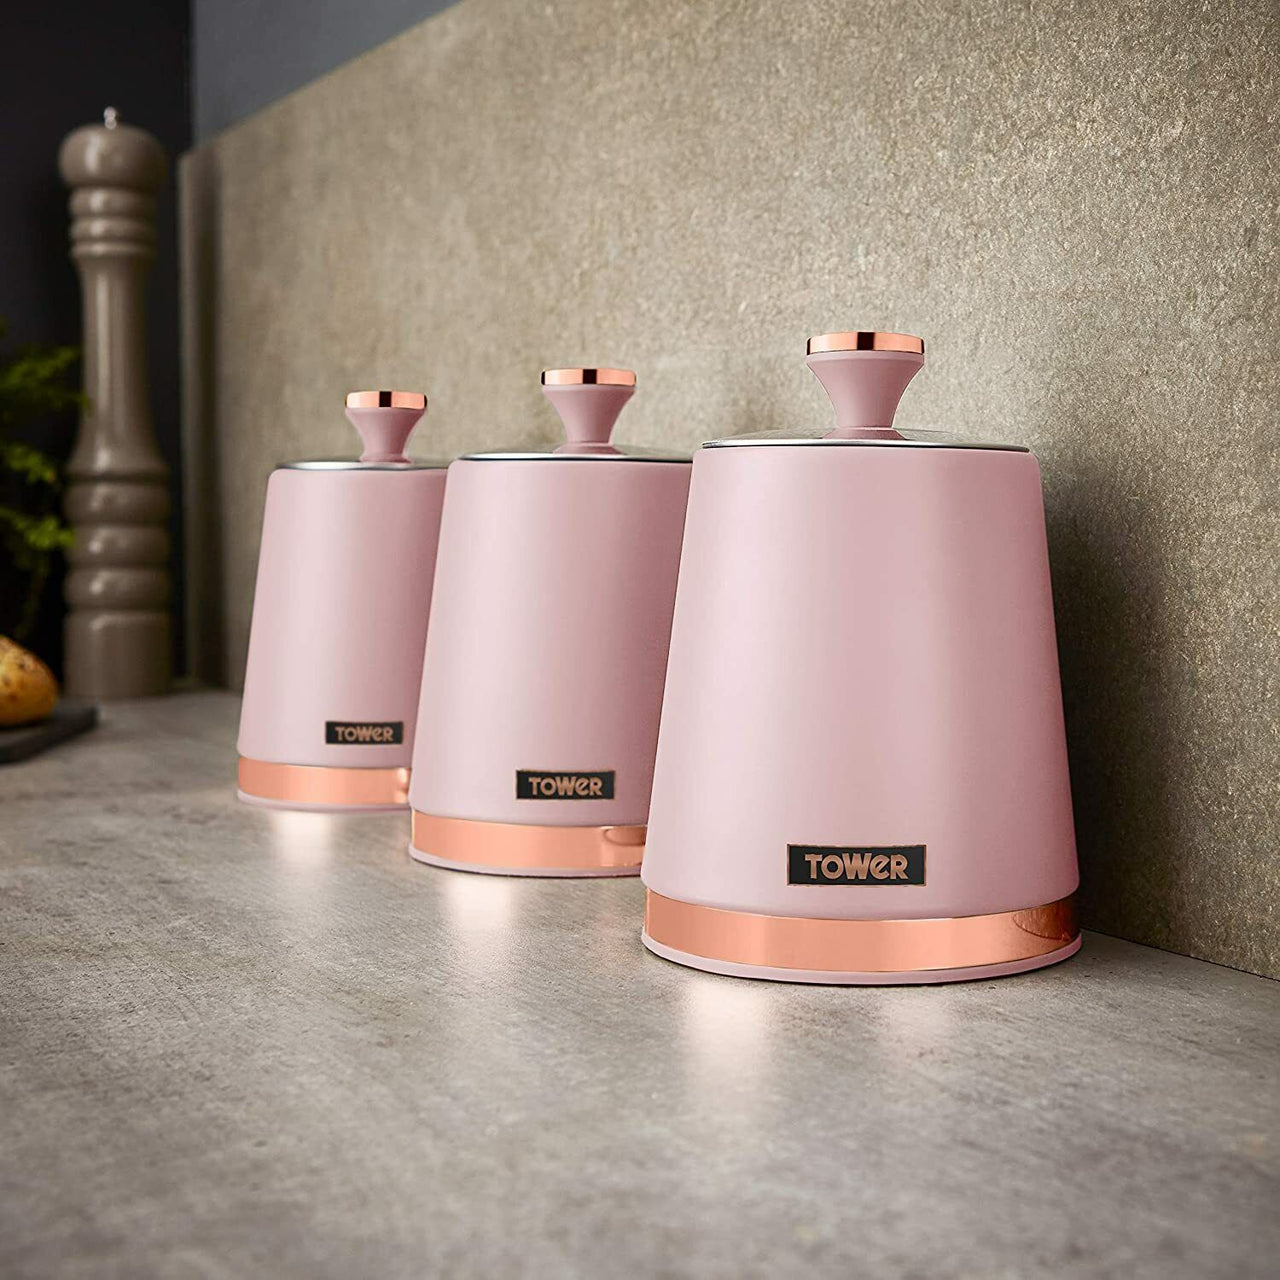 Tower Cavaletto Tea Coffee Sugar Storage Canisters Set Pink & Rose Gold